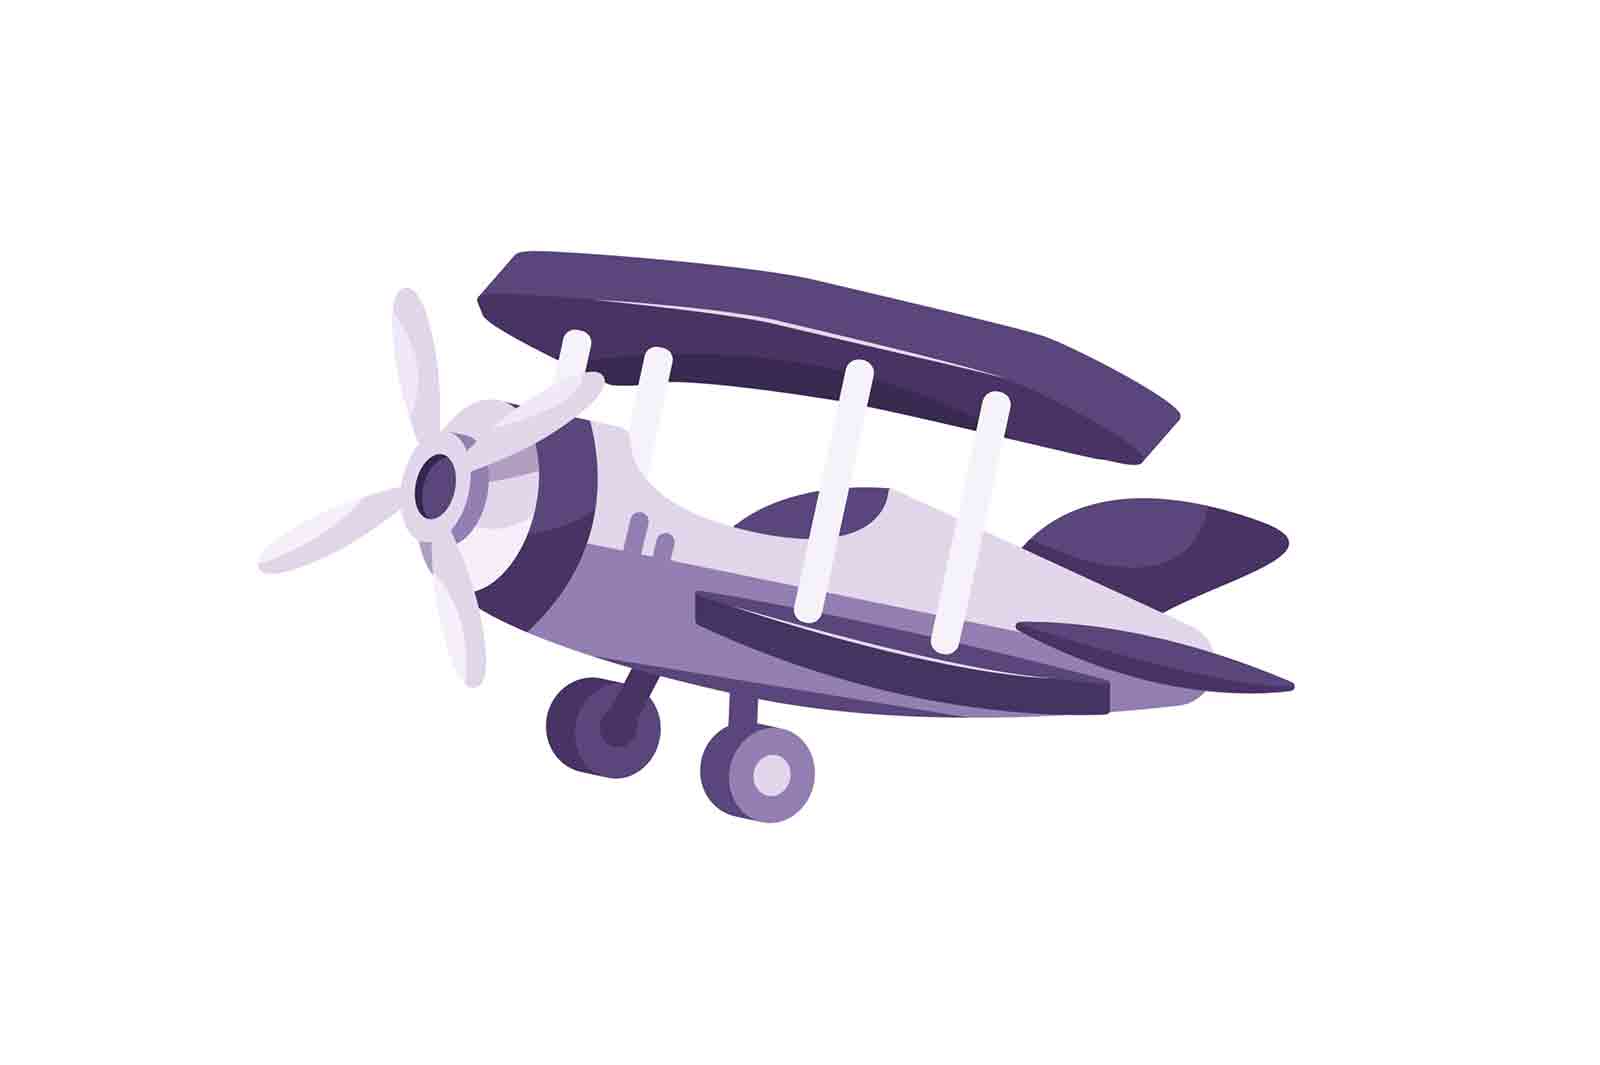 Vintage single seater plane with propeller in the sky isolated on white background, flat illustration.